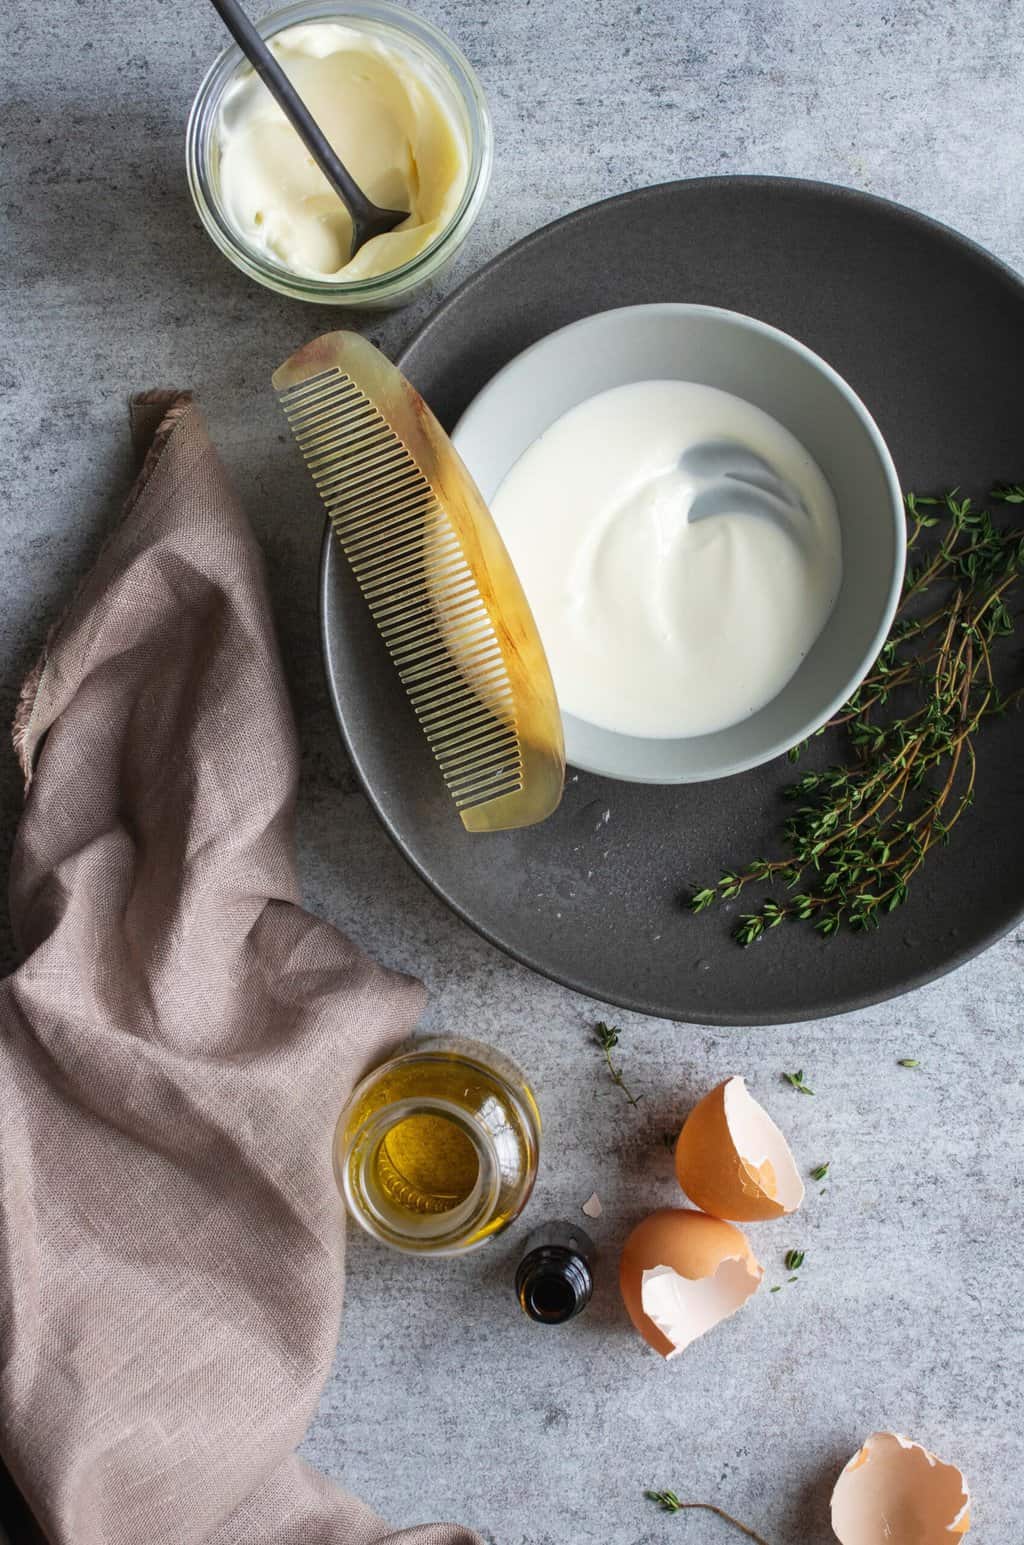 How to Make Your Own Protein-Rich Mayo Hair Mask at Home - Hello Glow